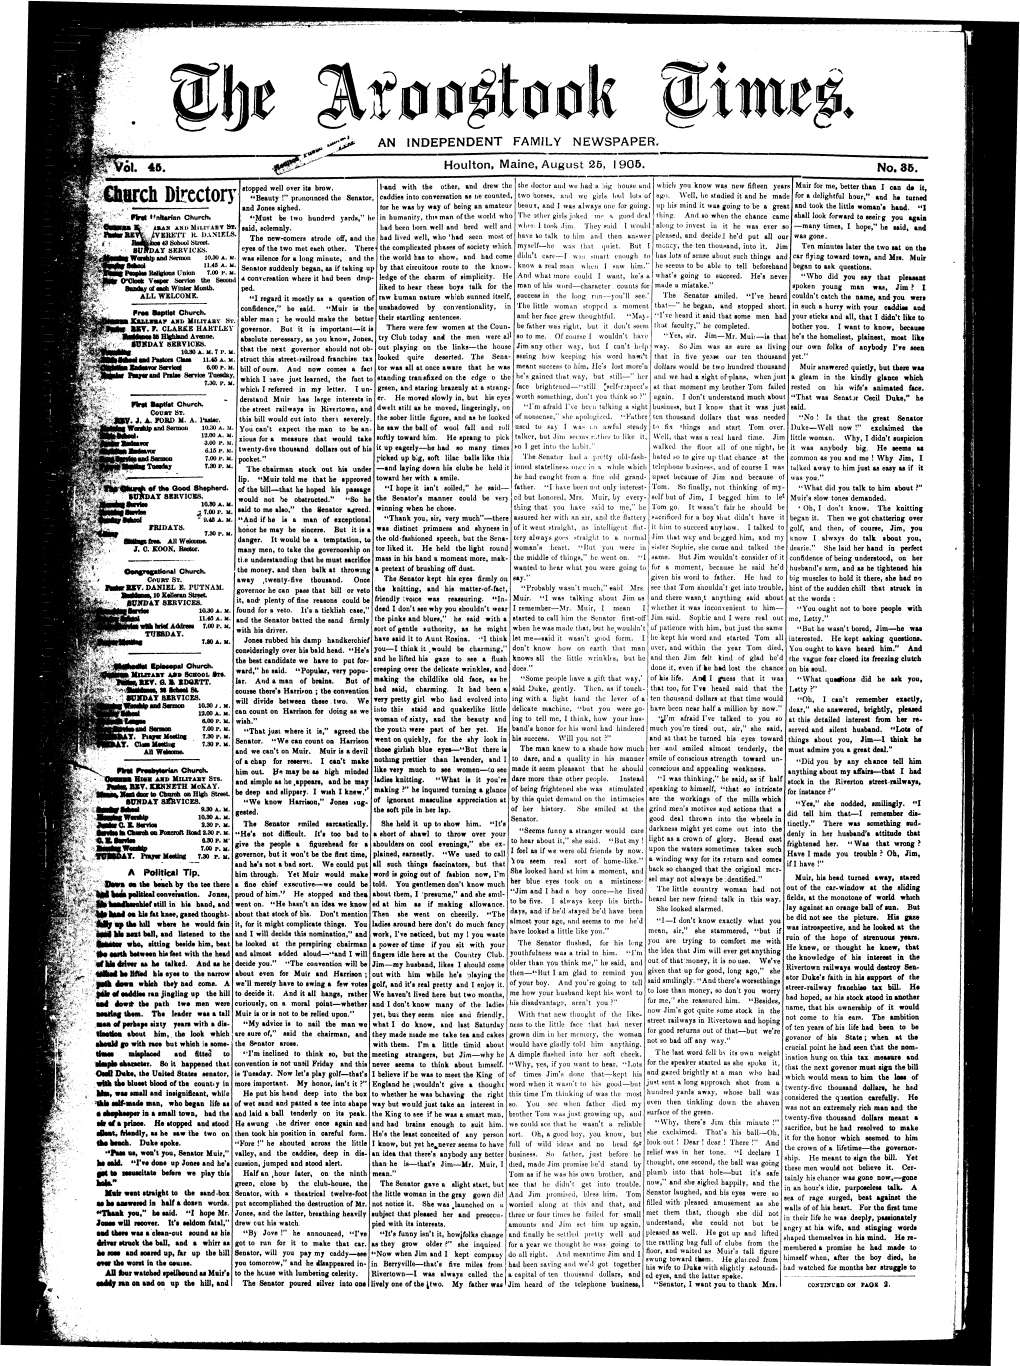 The Aroostook Times, August 25, 1905